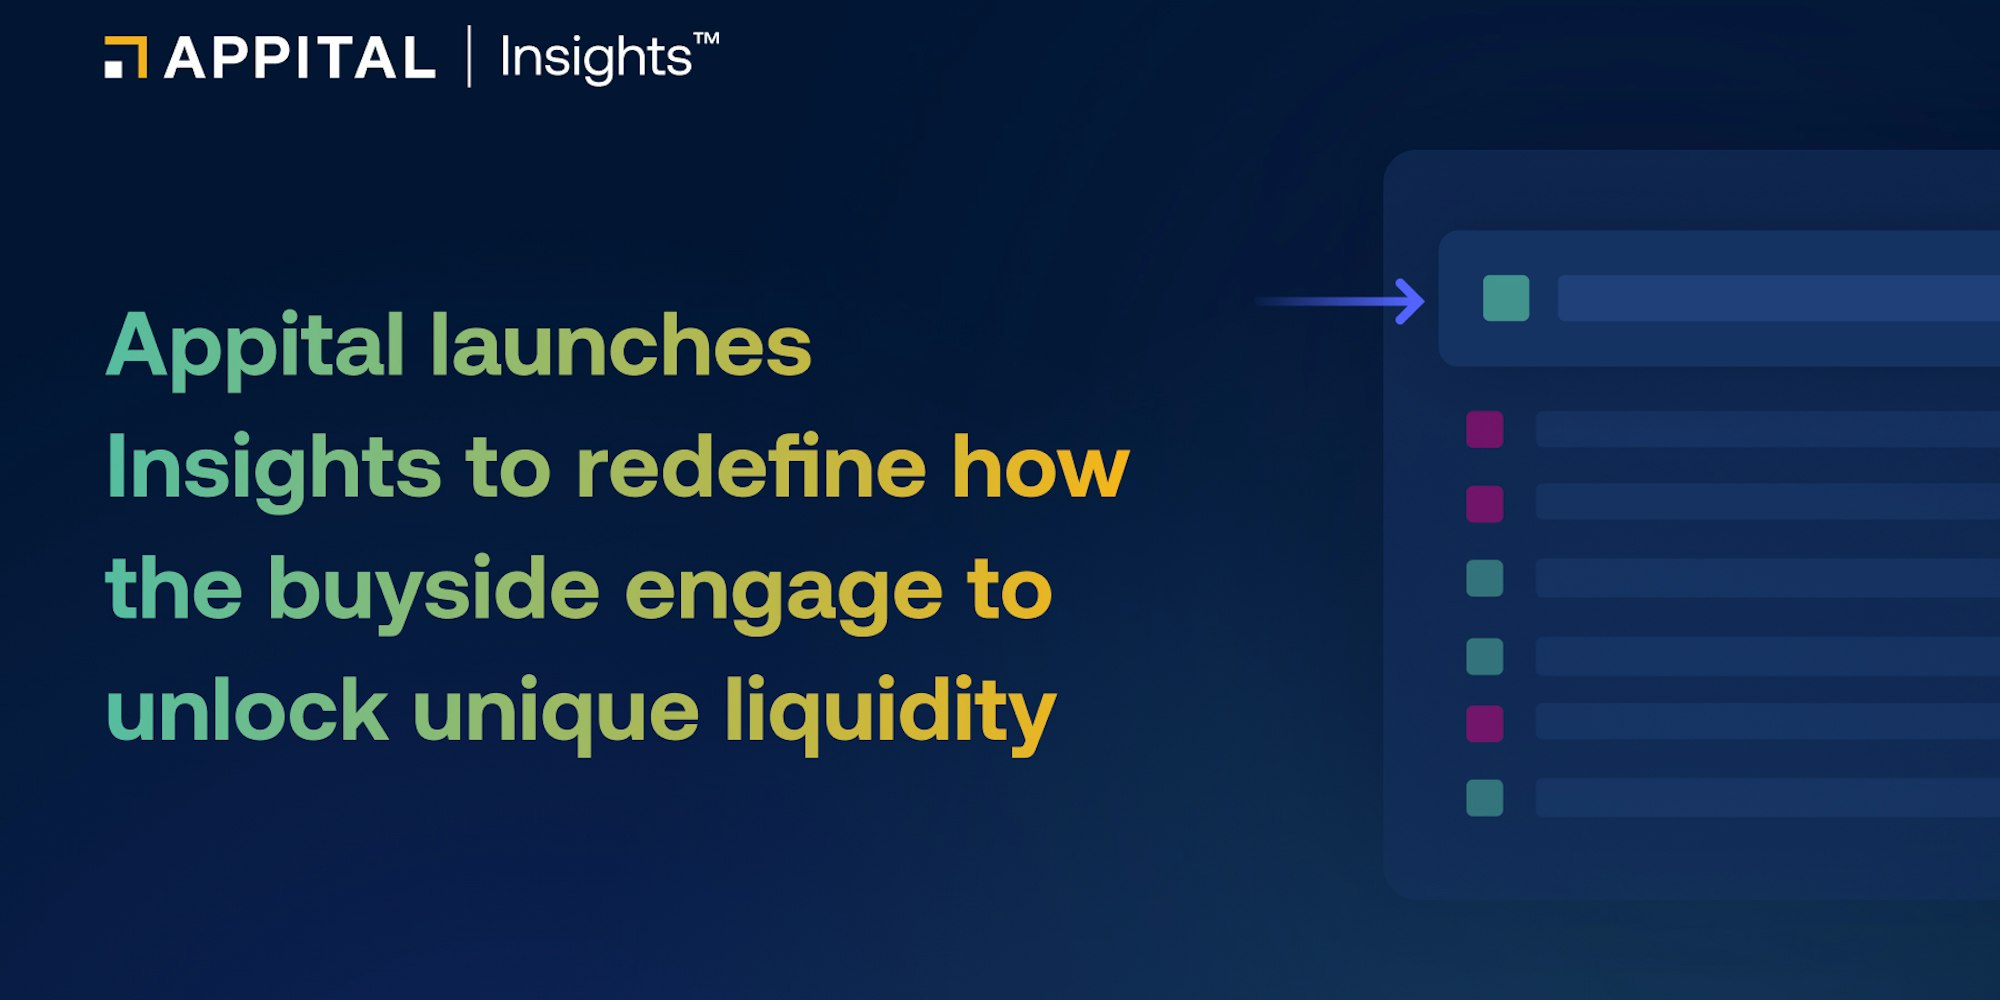 Appital launches Insights to redefine how the buyside engage to unlock unique liquidity